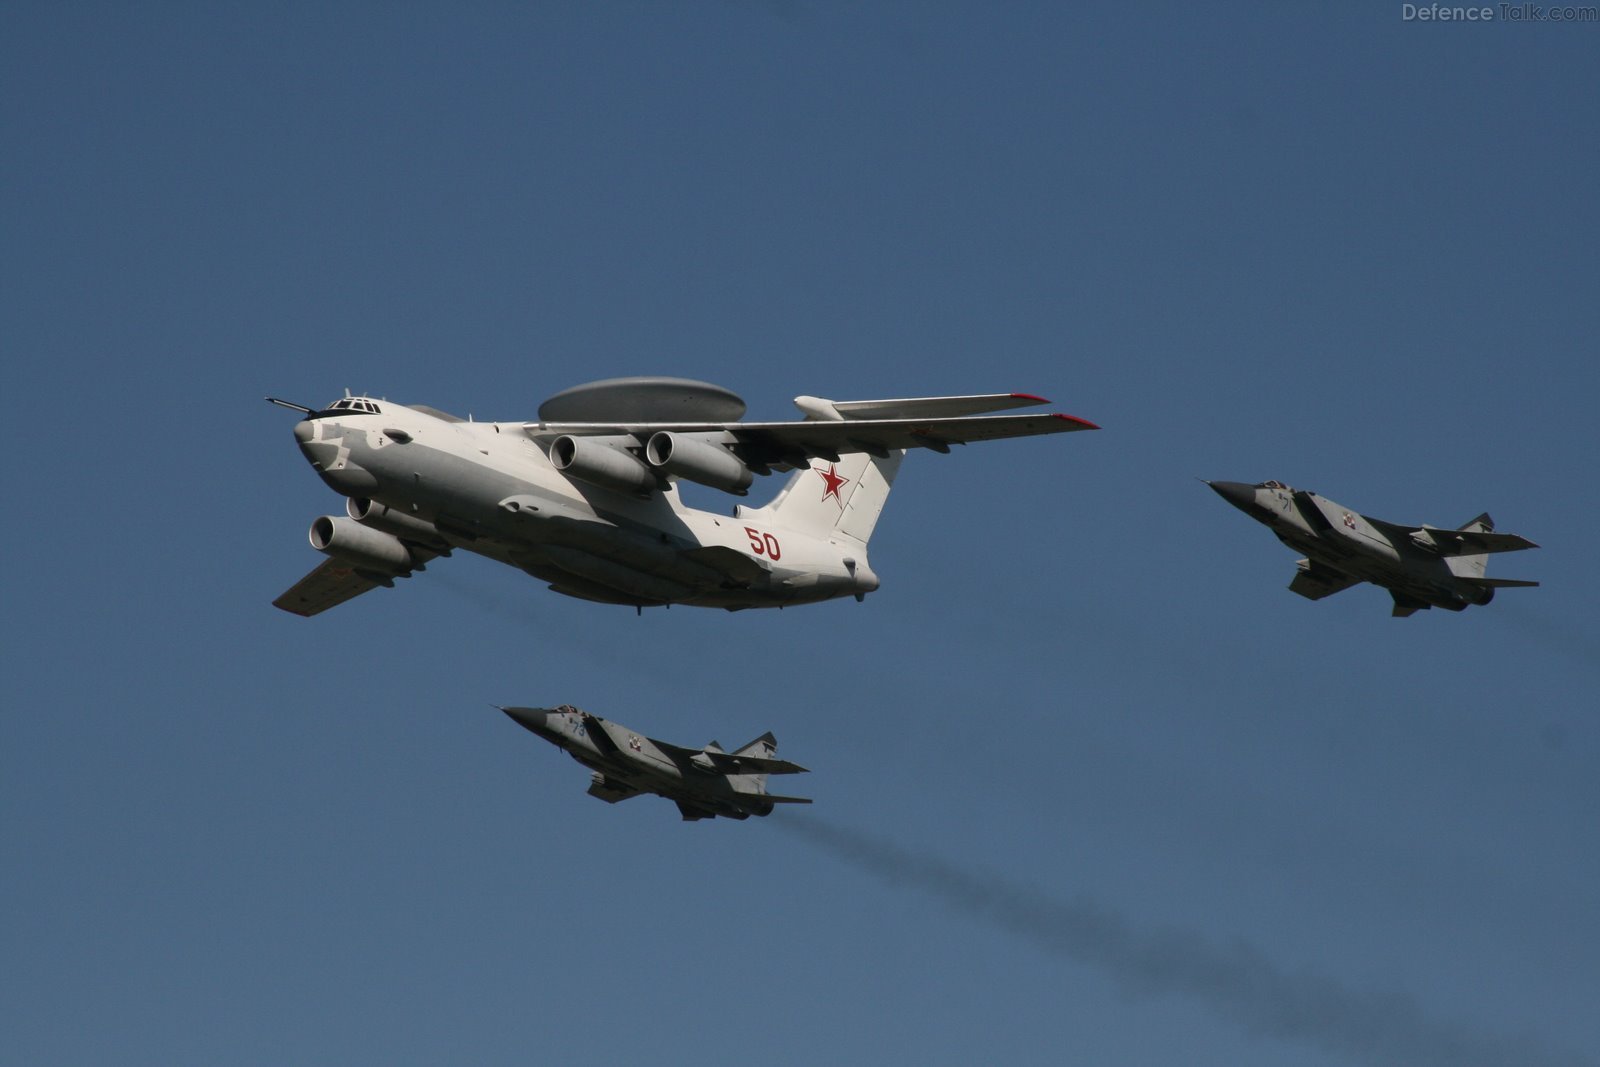 A-50 with MiG-31